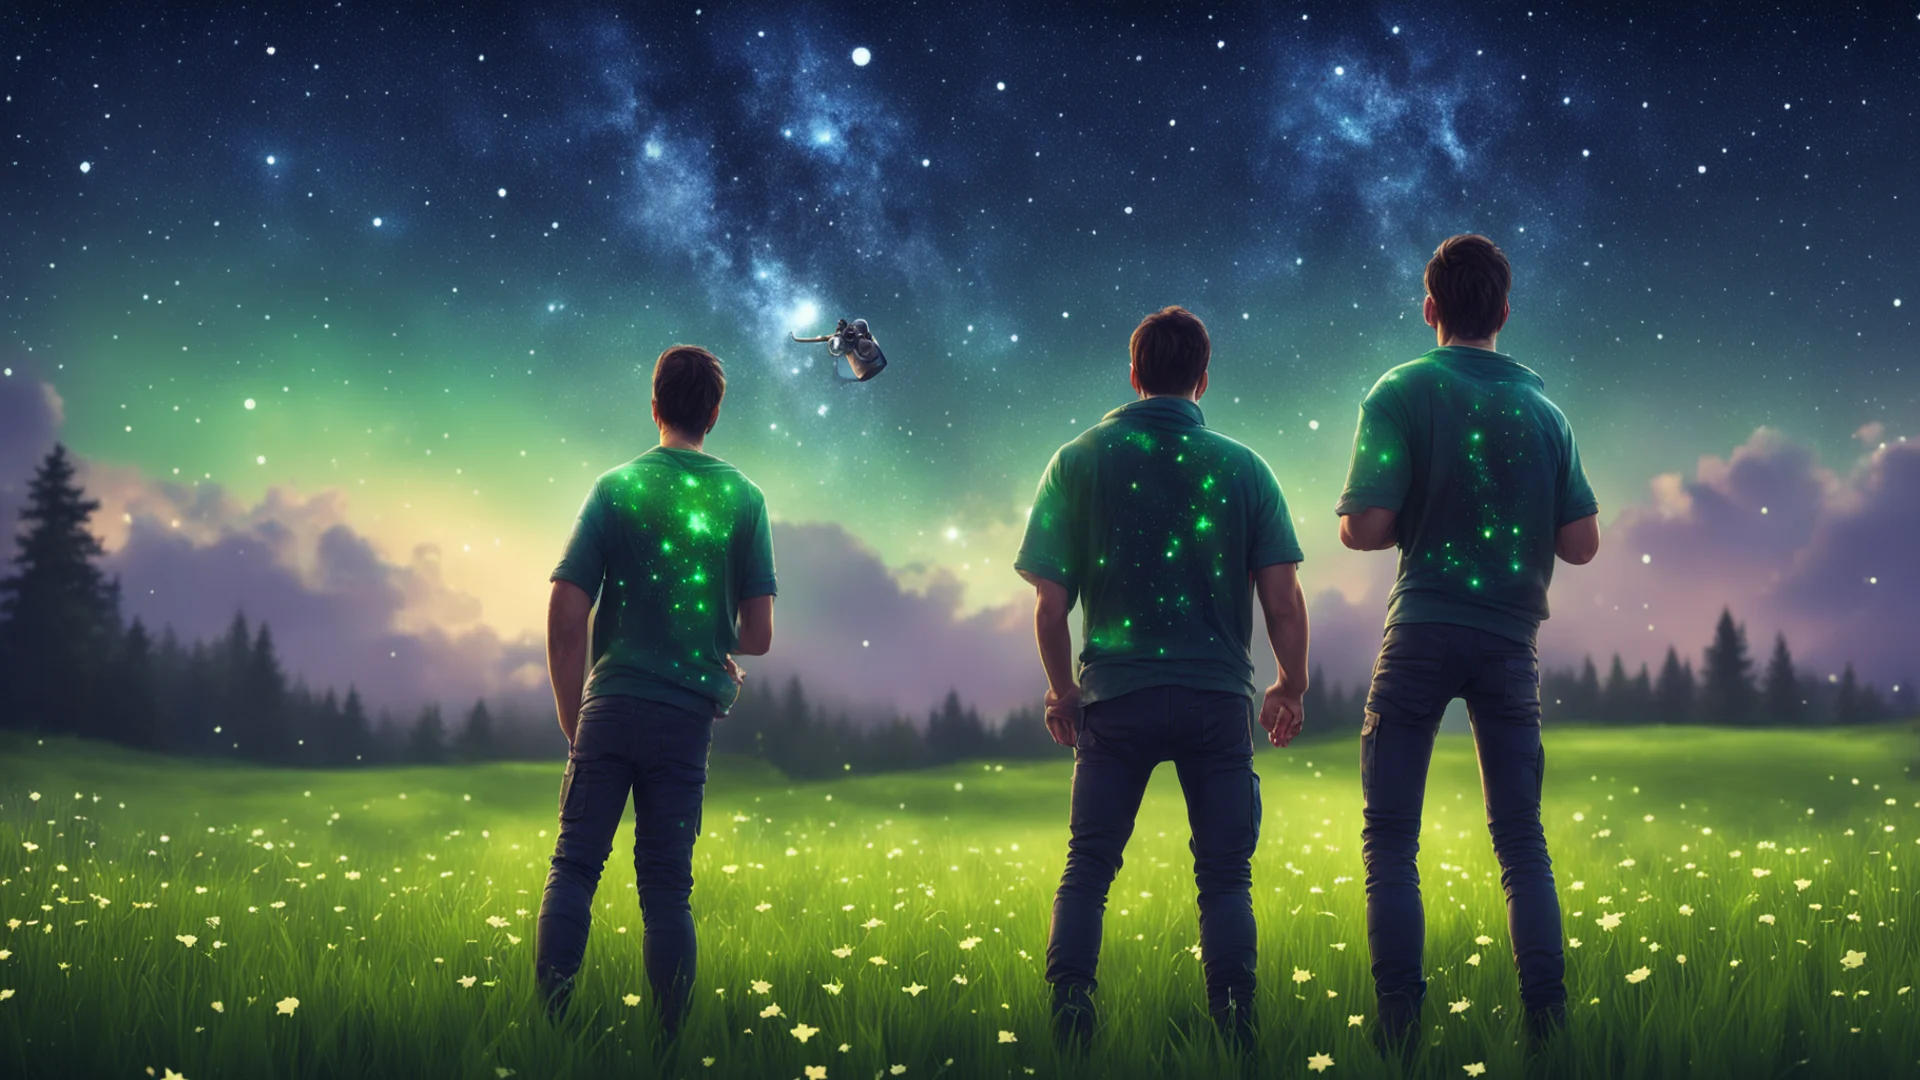 gamer character standing with his back turned with an xbox controller in a starry meadow amazing awesome portrait 2 wide